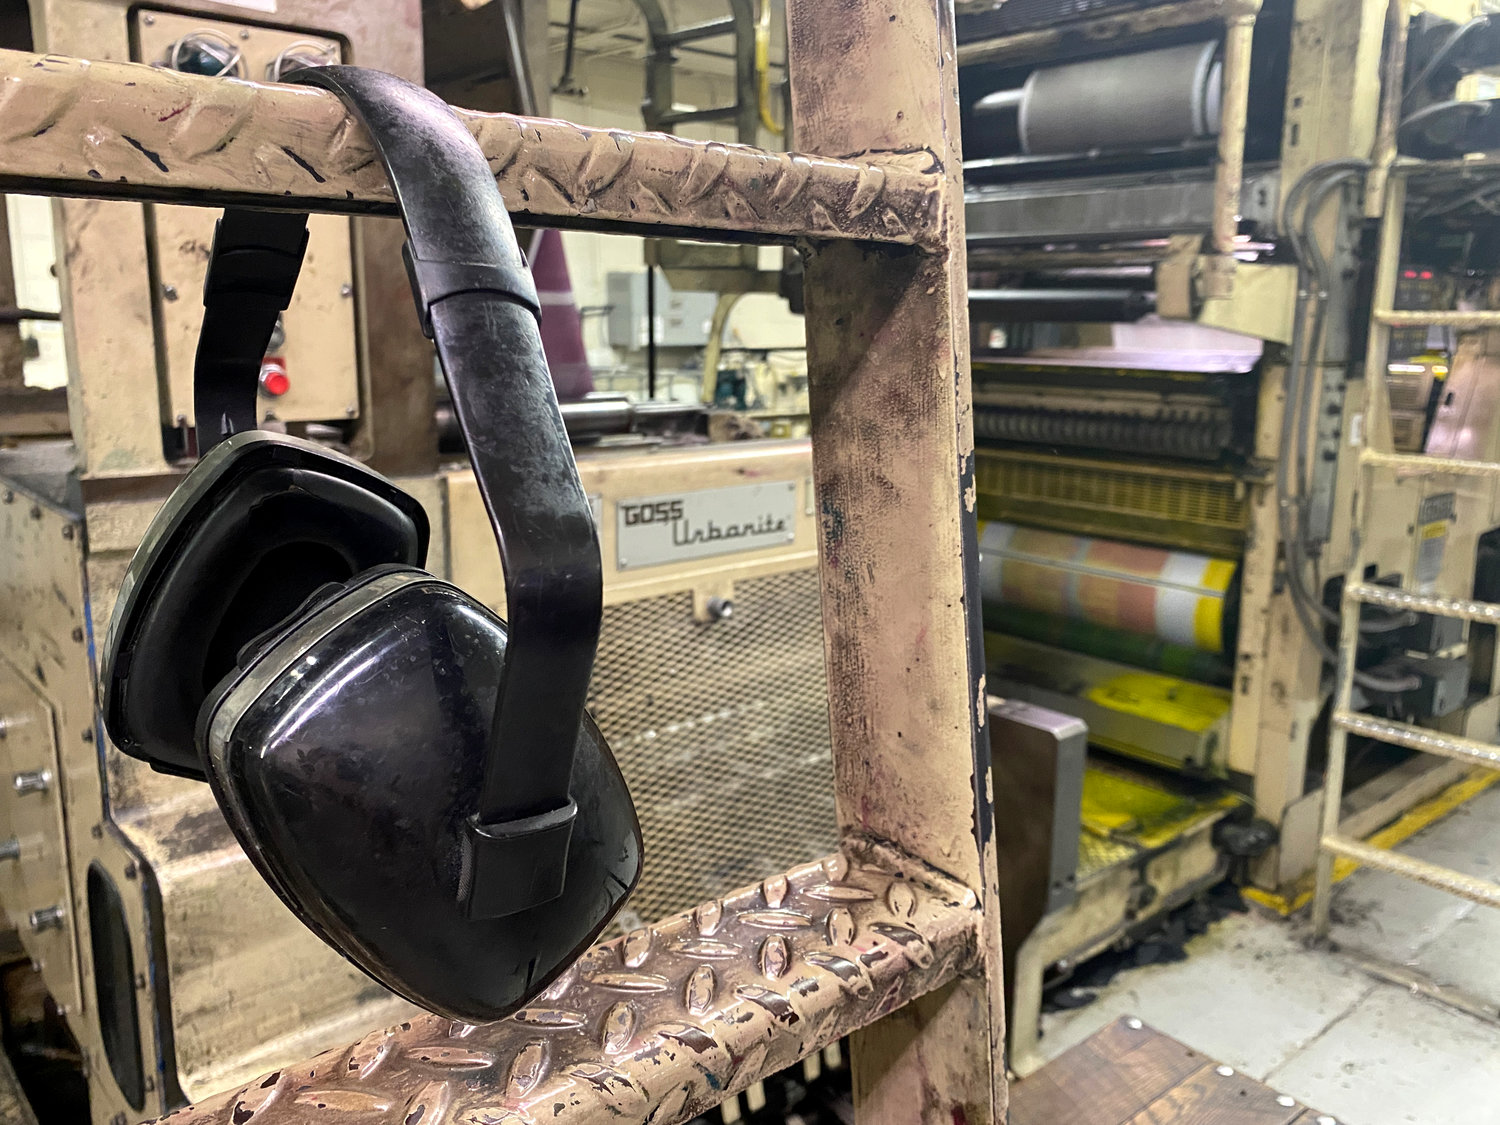 After the final paper rolled off the press, pressman Nelson Lakey hung up his ear protection for the last time Friday, March 11.